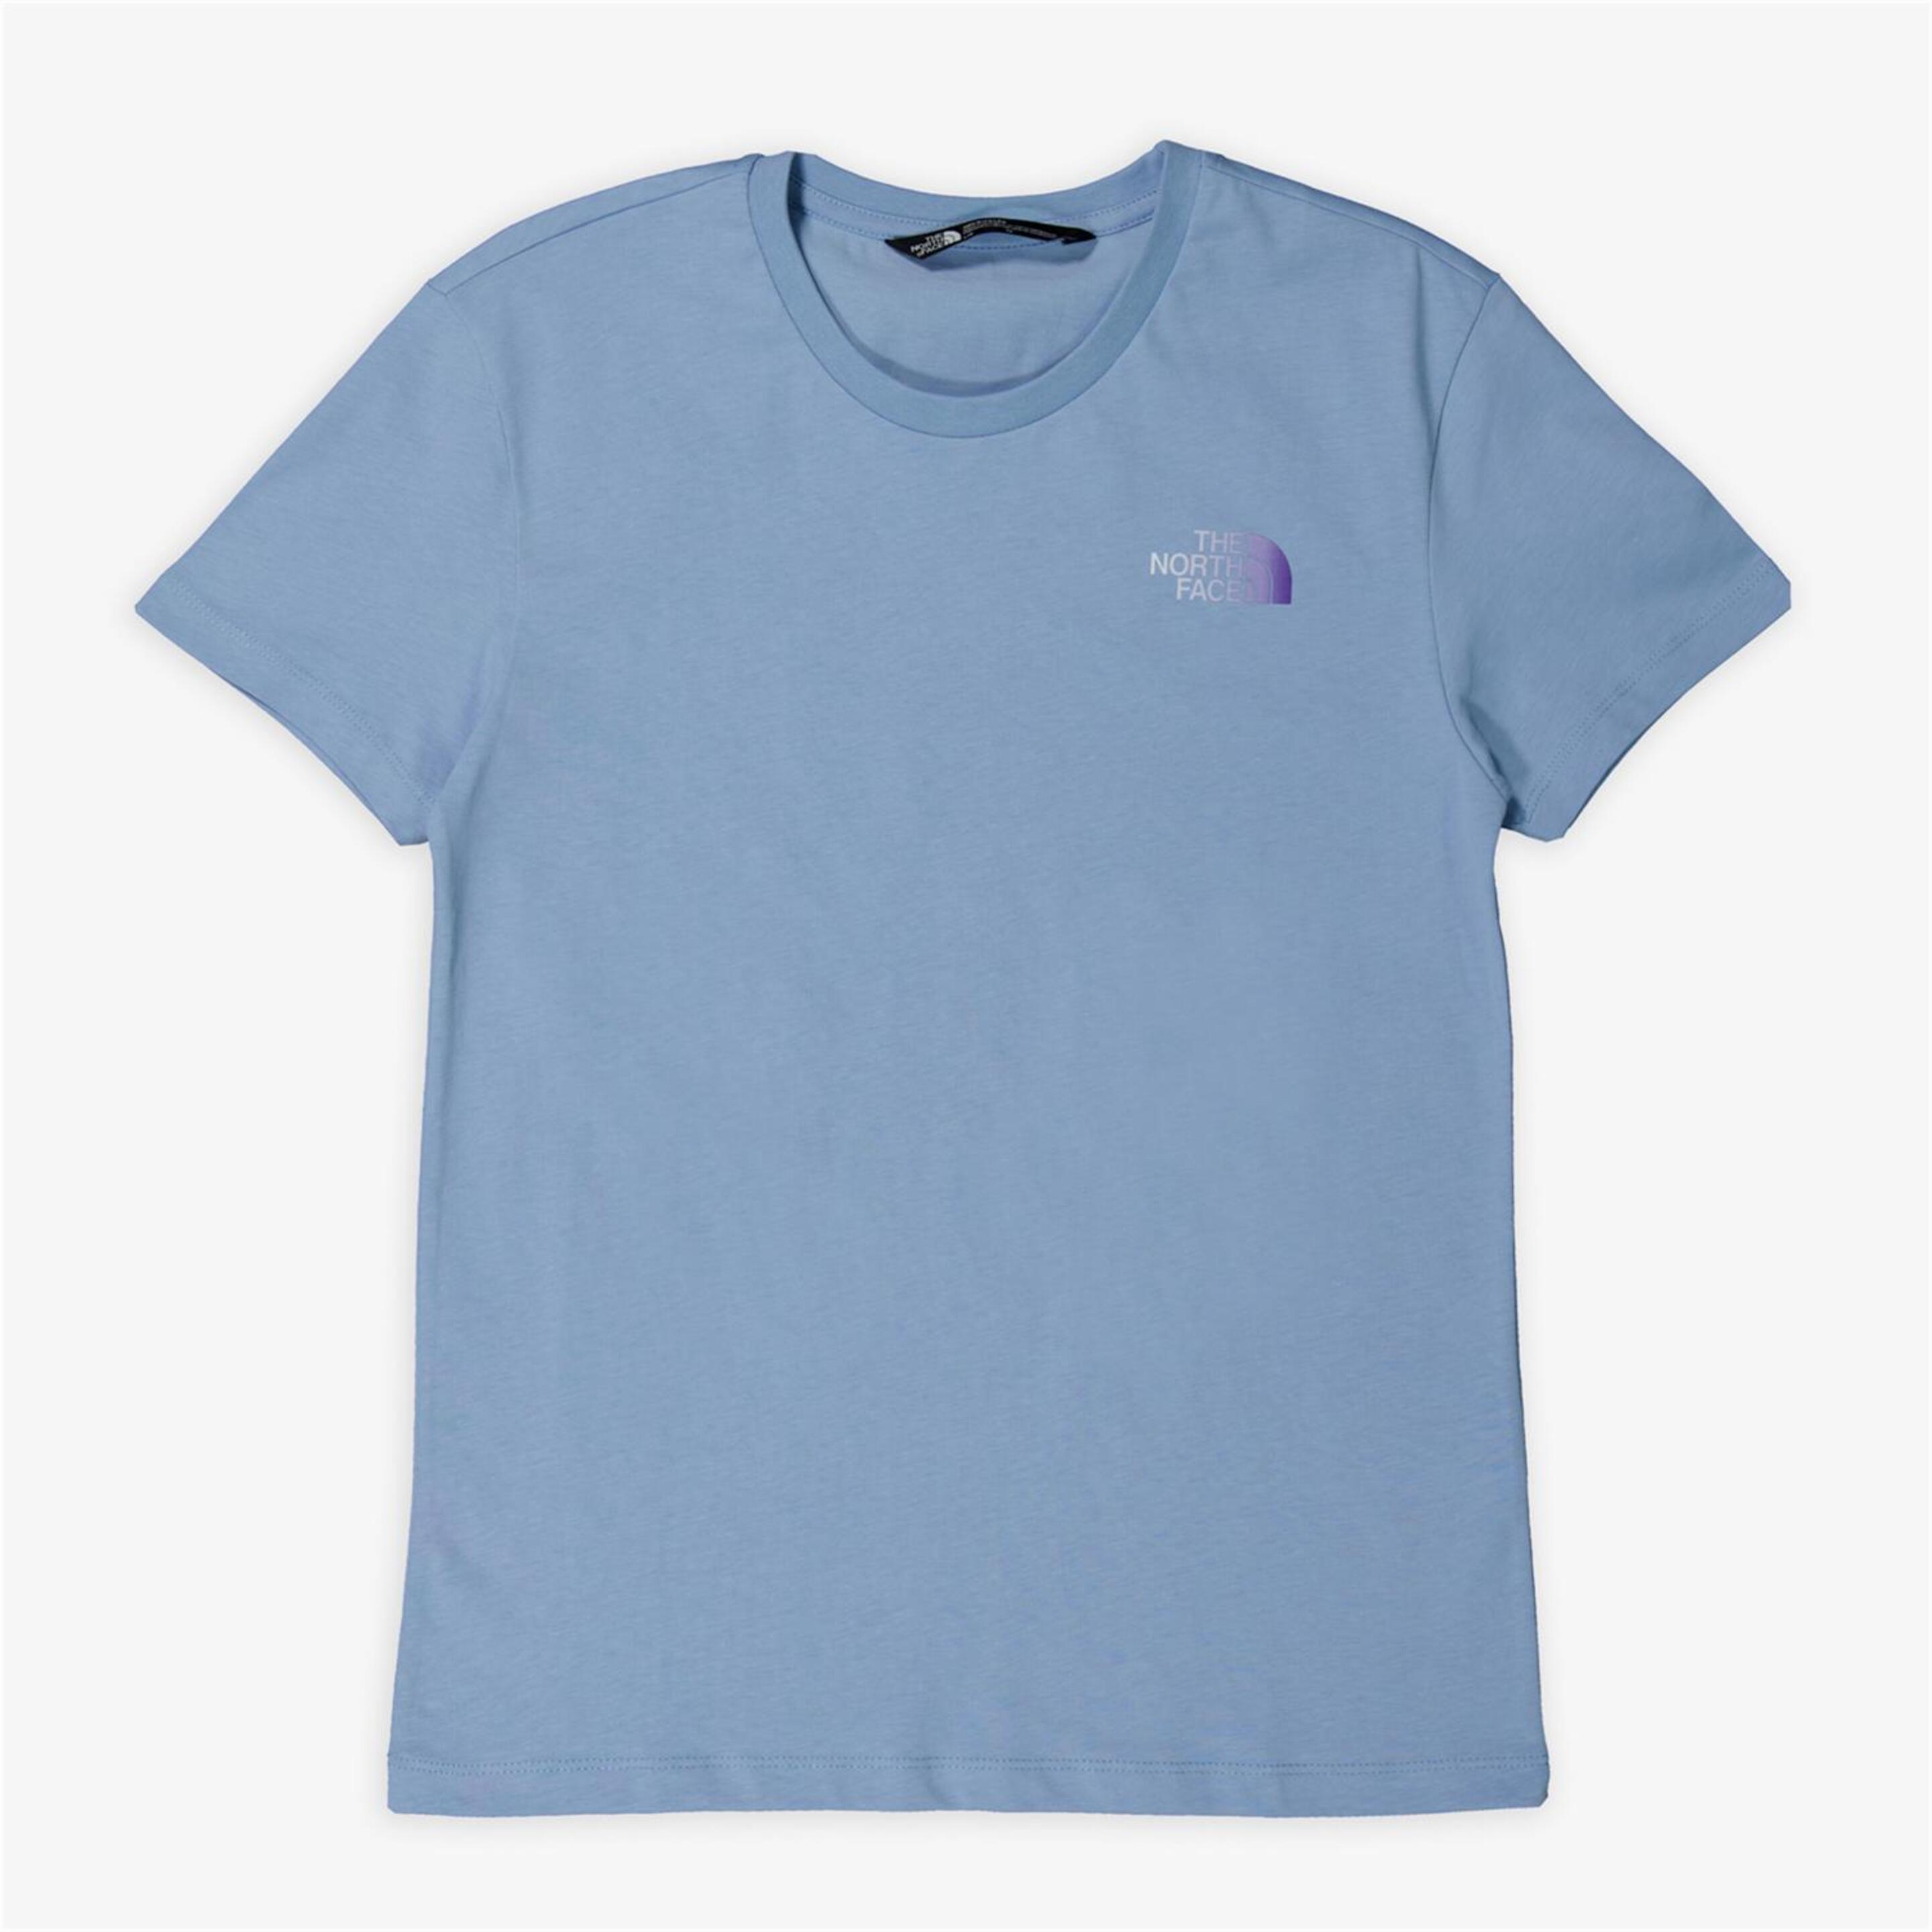 The North Face Relaxed Graphic 2 - azul - T-shirt Trekking Rapariga